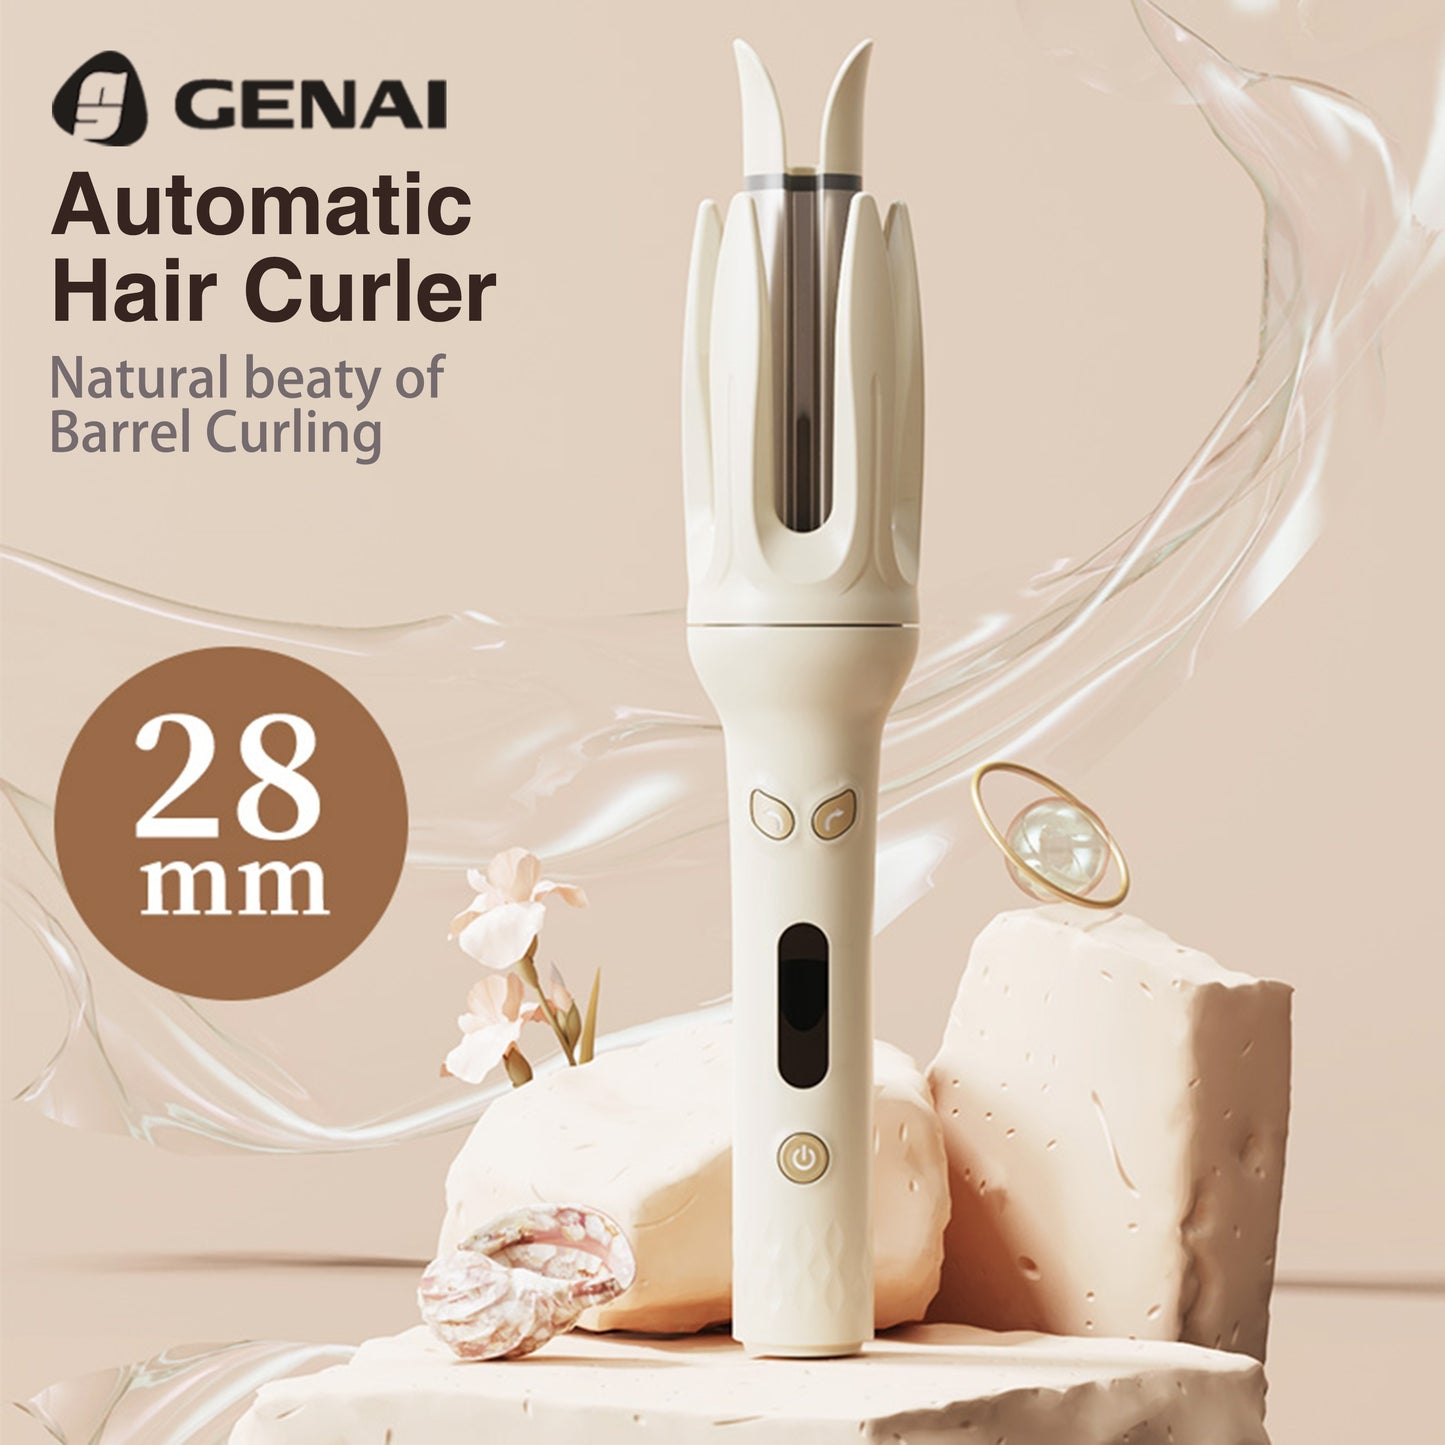 Lomotec 2024 New Hair Curler with Intelligent Timer and Sensor